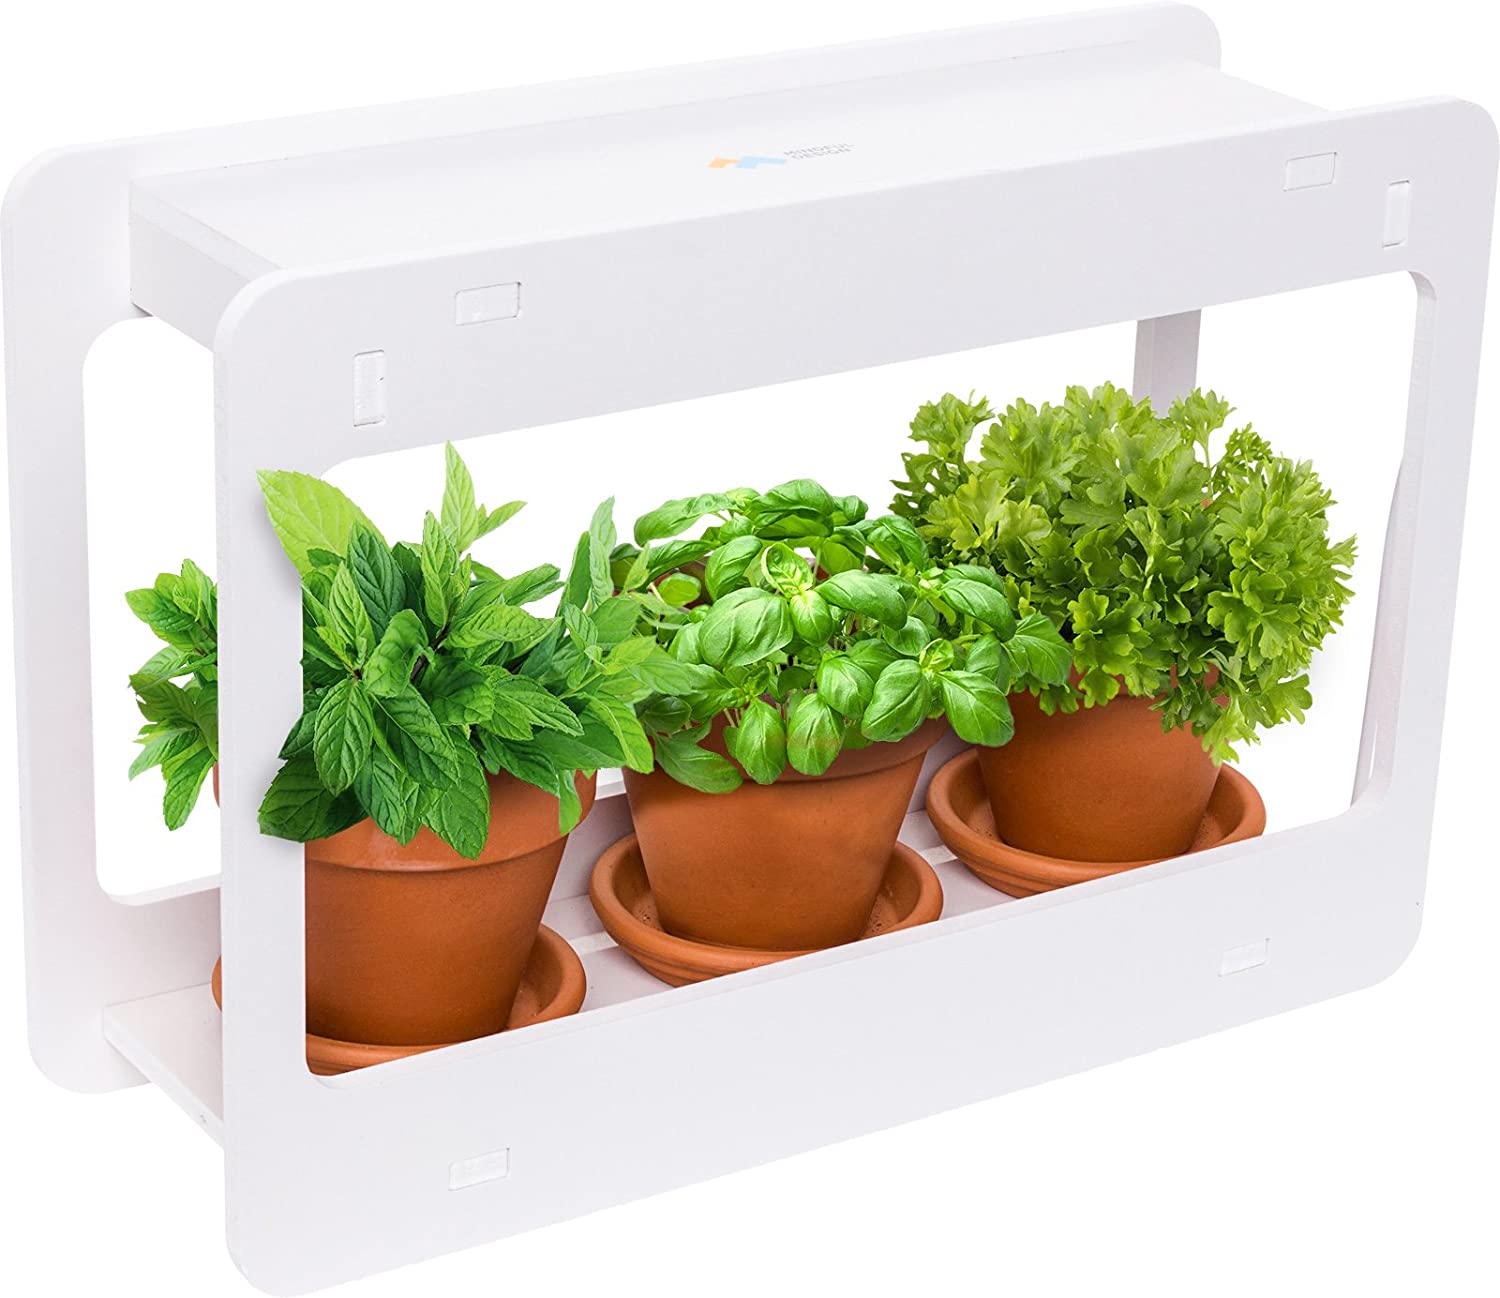 Mindful Design LED Indoor Herb Garden – at Home Mini Window Planter Kit for Herbs, Succulents, and Vegetables (White)